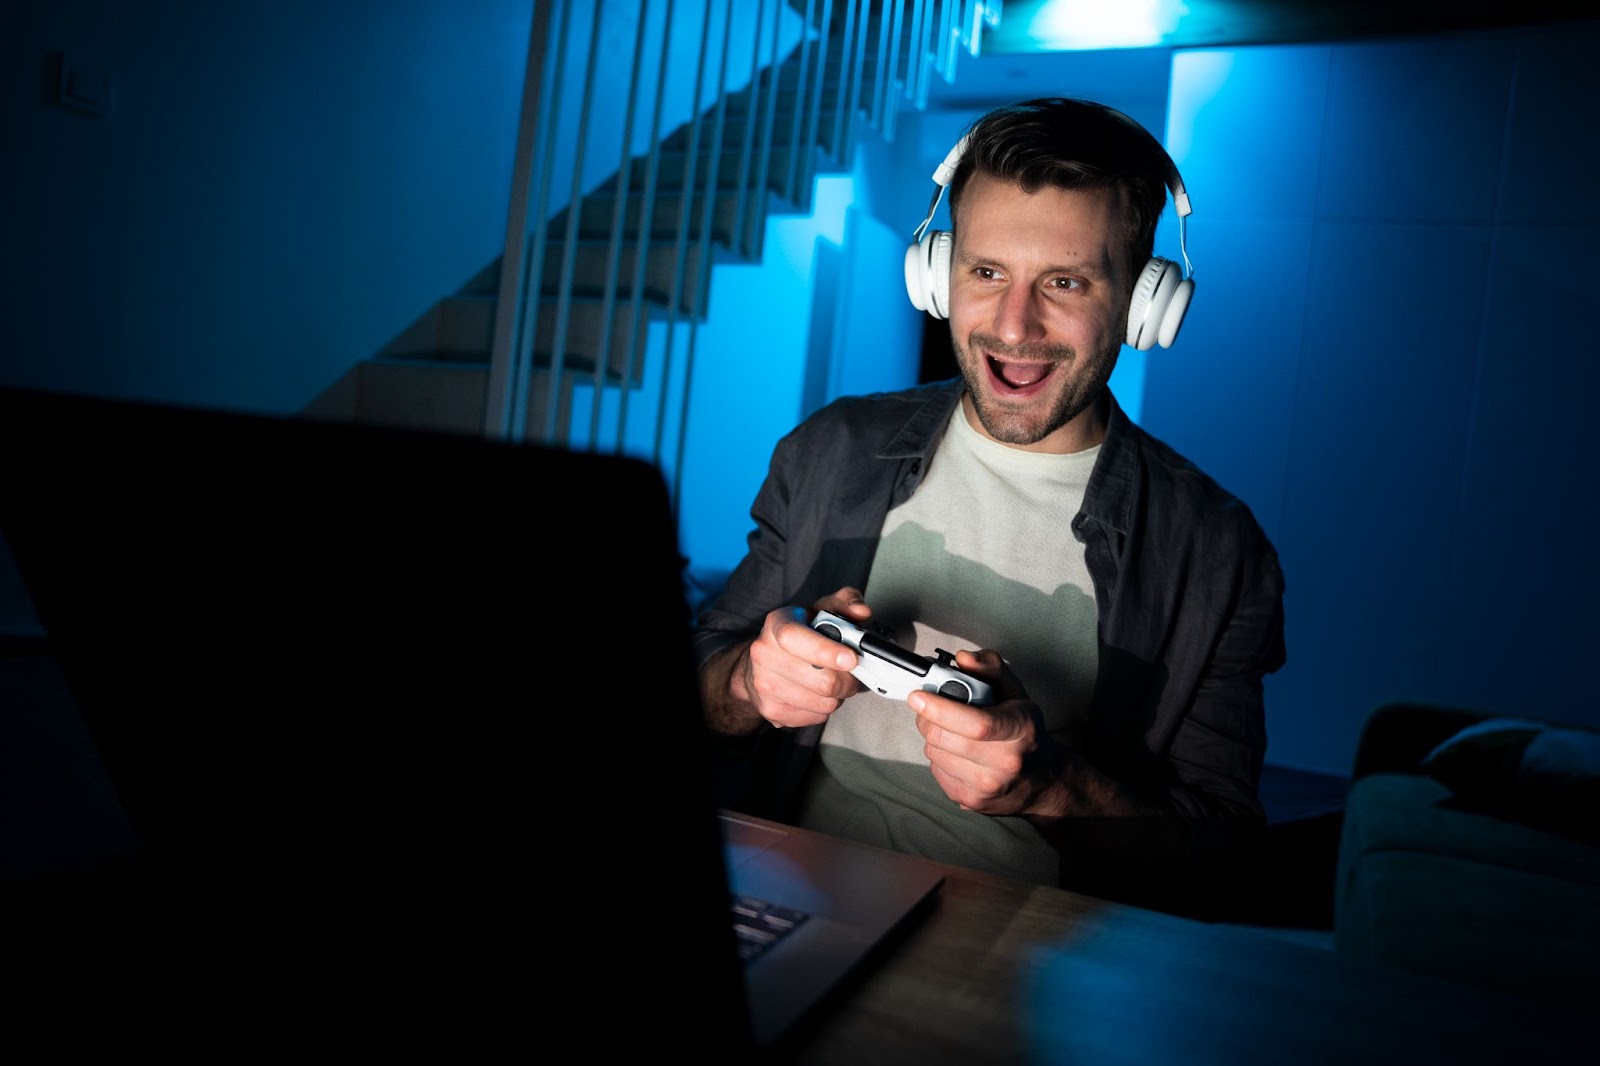 A man playing computer games